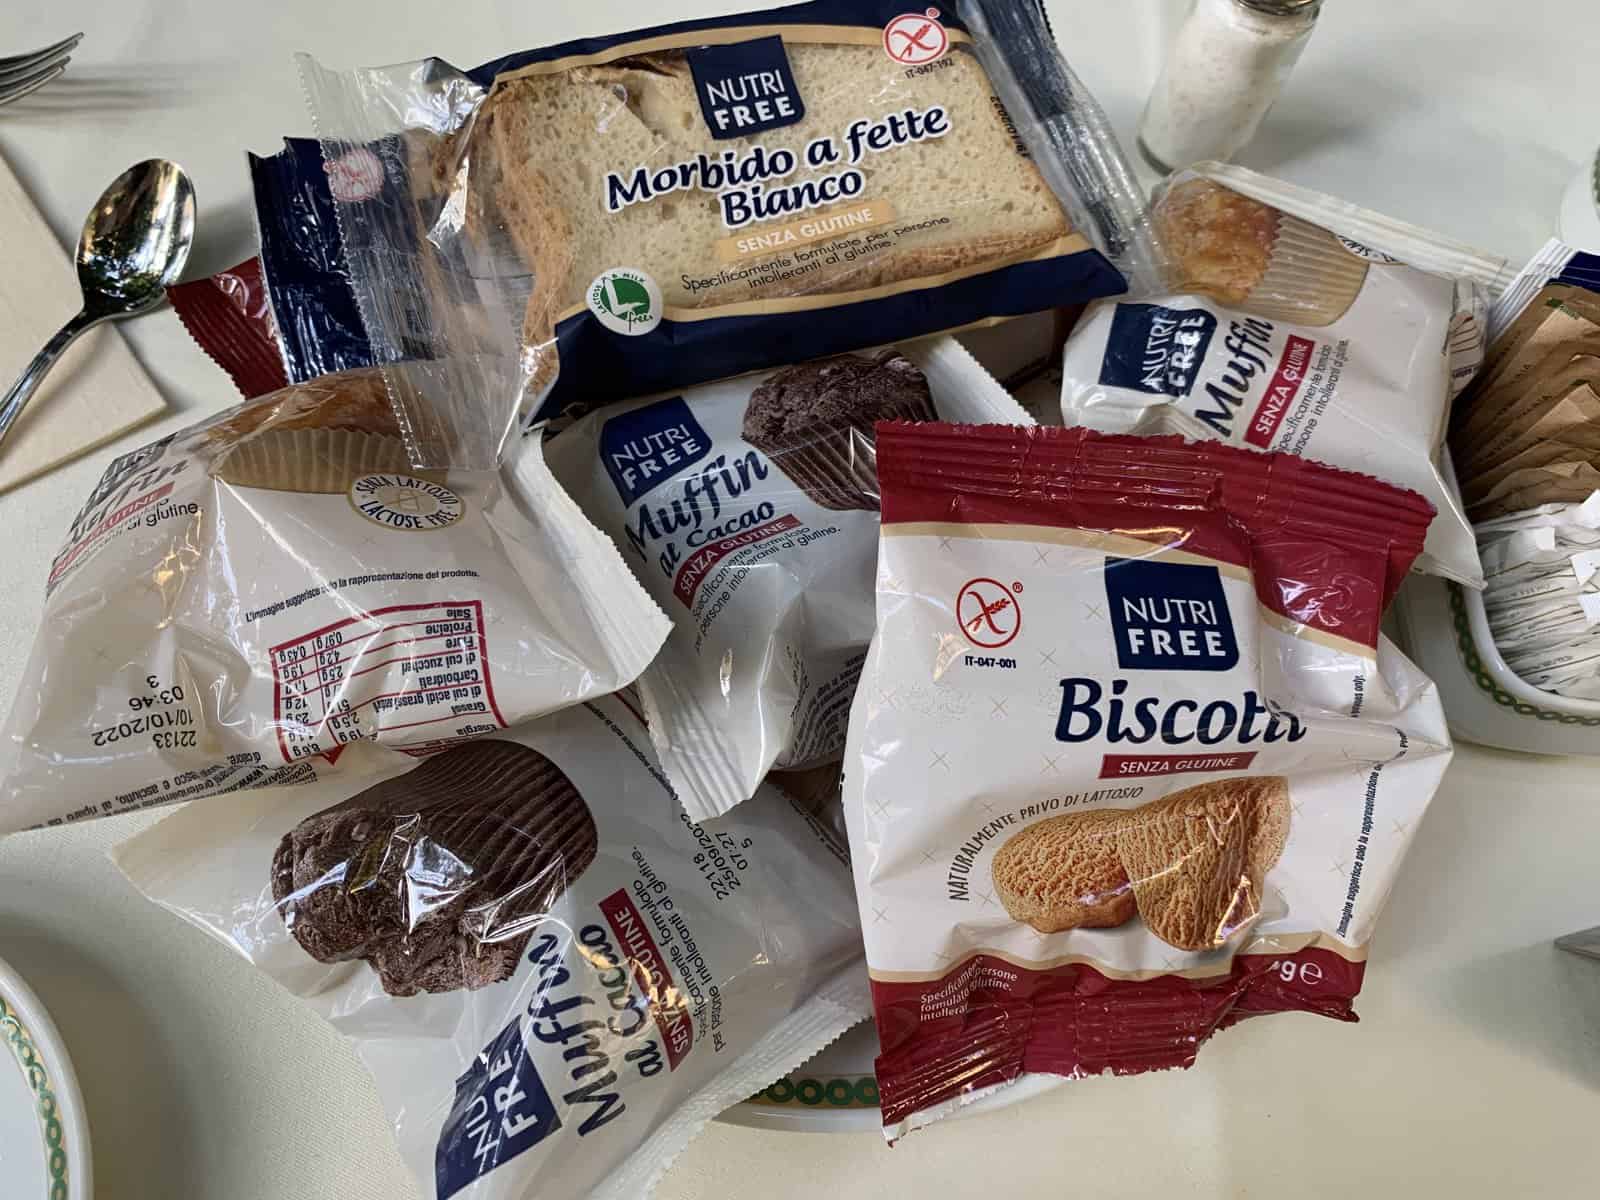 gluten-free breakfast treats, pre-packaged, including biscotto cookies, muffins and bread